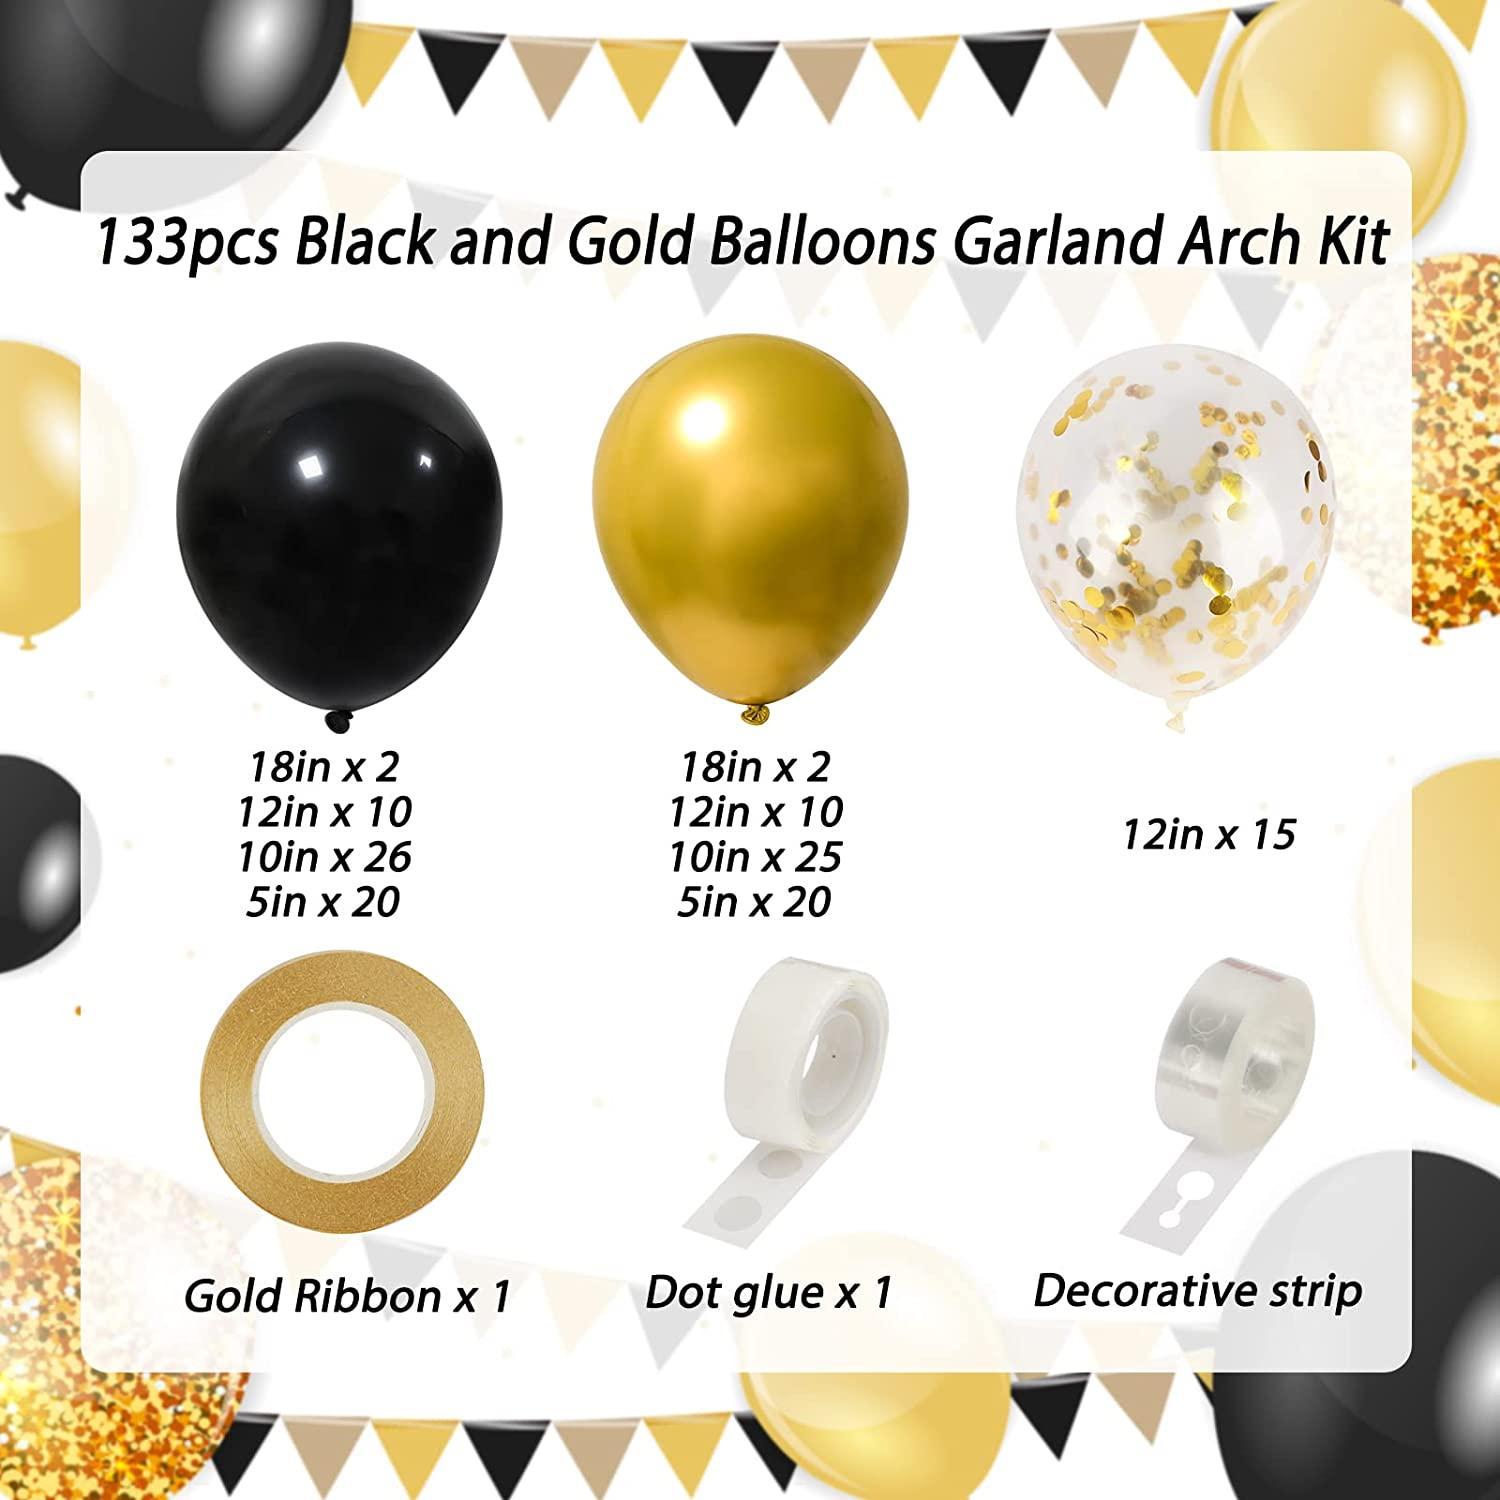 133pcs Black and Gold Balloons Garland Arch Kit, Black Metal Gold and Metallic Confetti Gold Balloons for Graduation - If you say i do